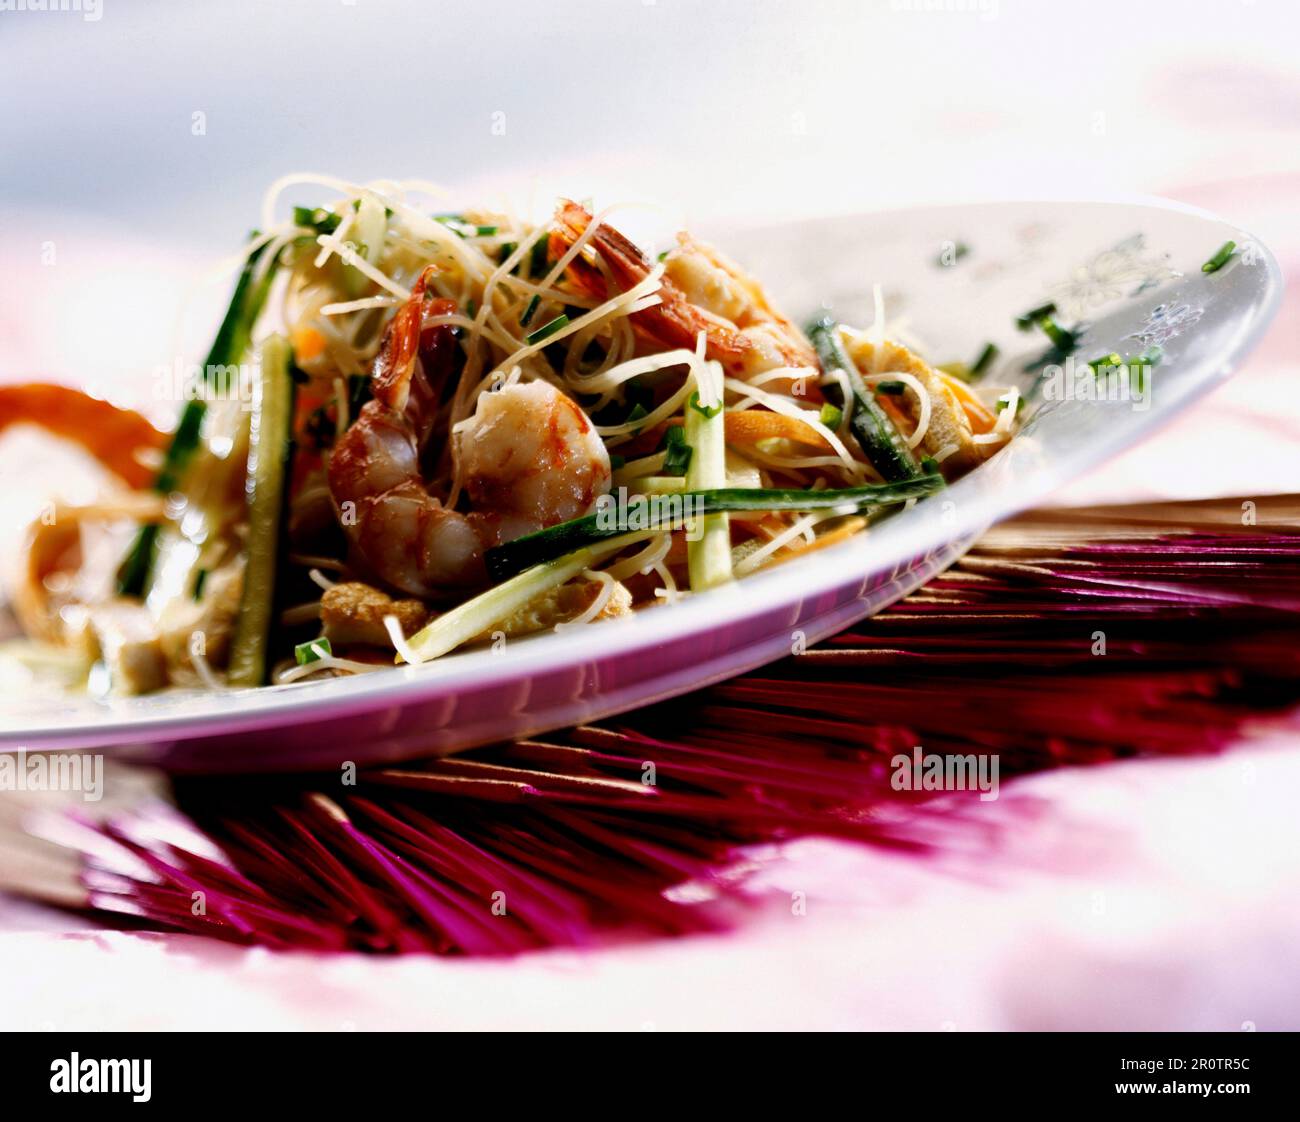 Fried noodles with prawns Stock Photo